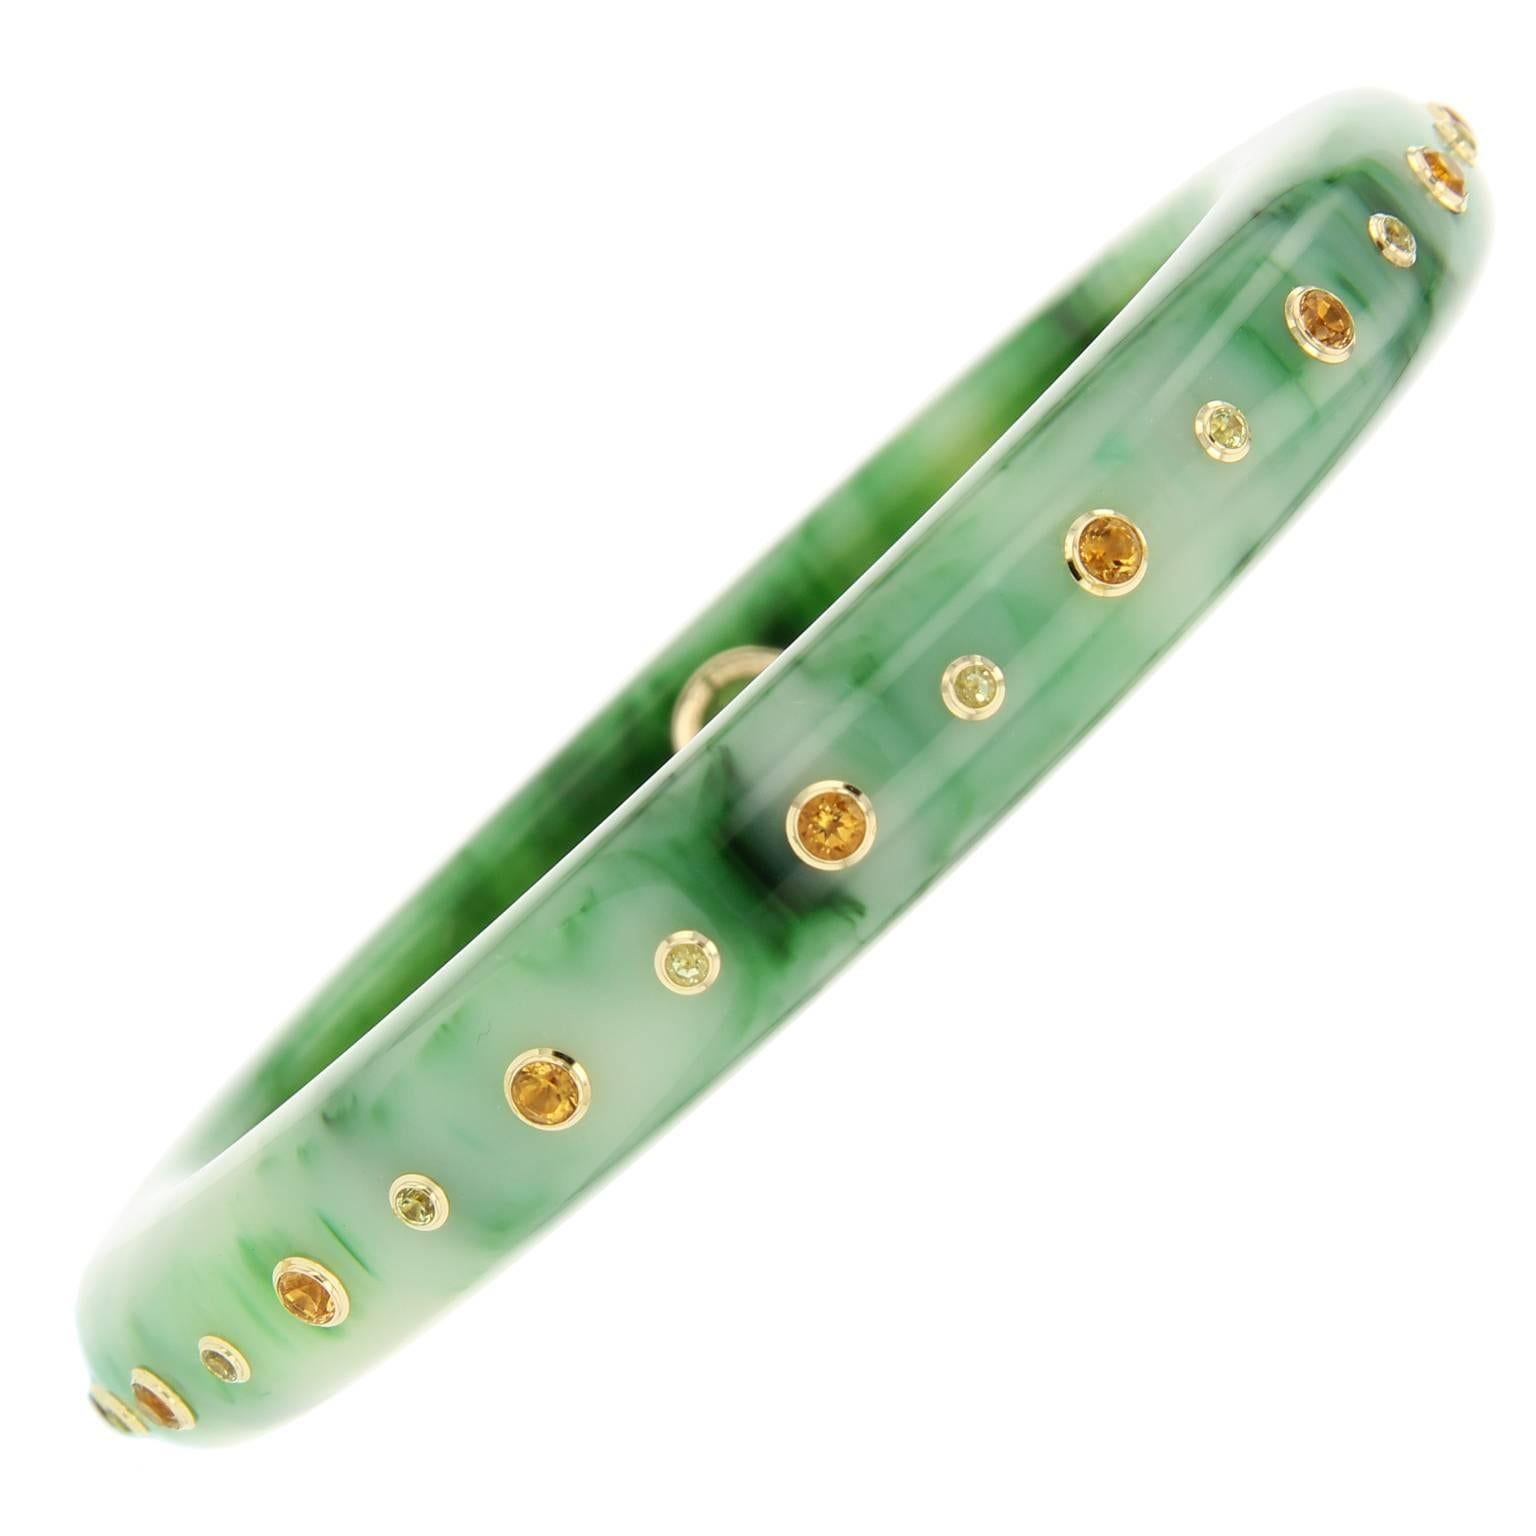 This marbled green bakelite bangle is perfectly studded with citrine and peridot   bezel-set in 18k yellow gold.

Full details below:
• From the Mark Davis Bakelite collection
• Marbled green bakelite 
• 1.60 ct citrine, 0.64 ct peridot
• Polished